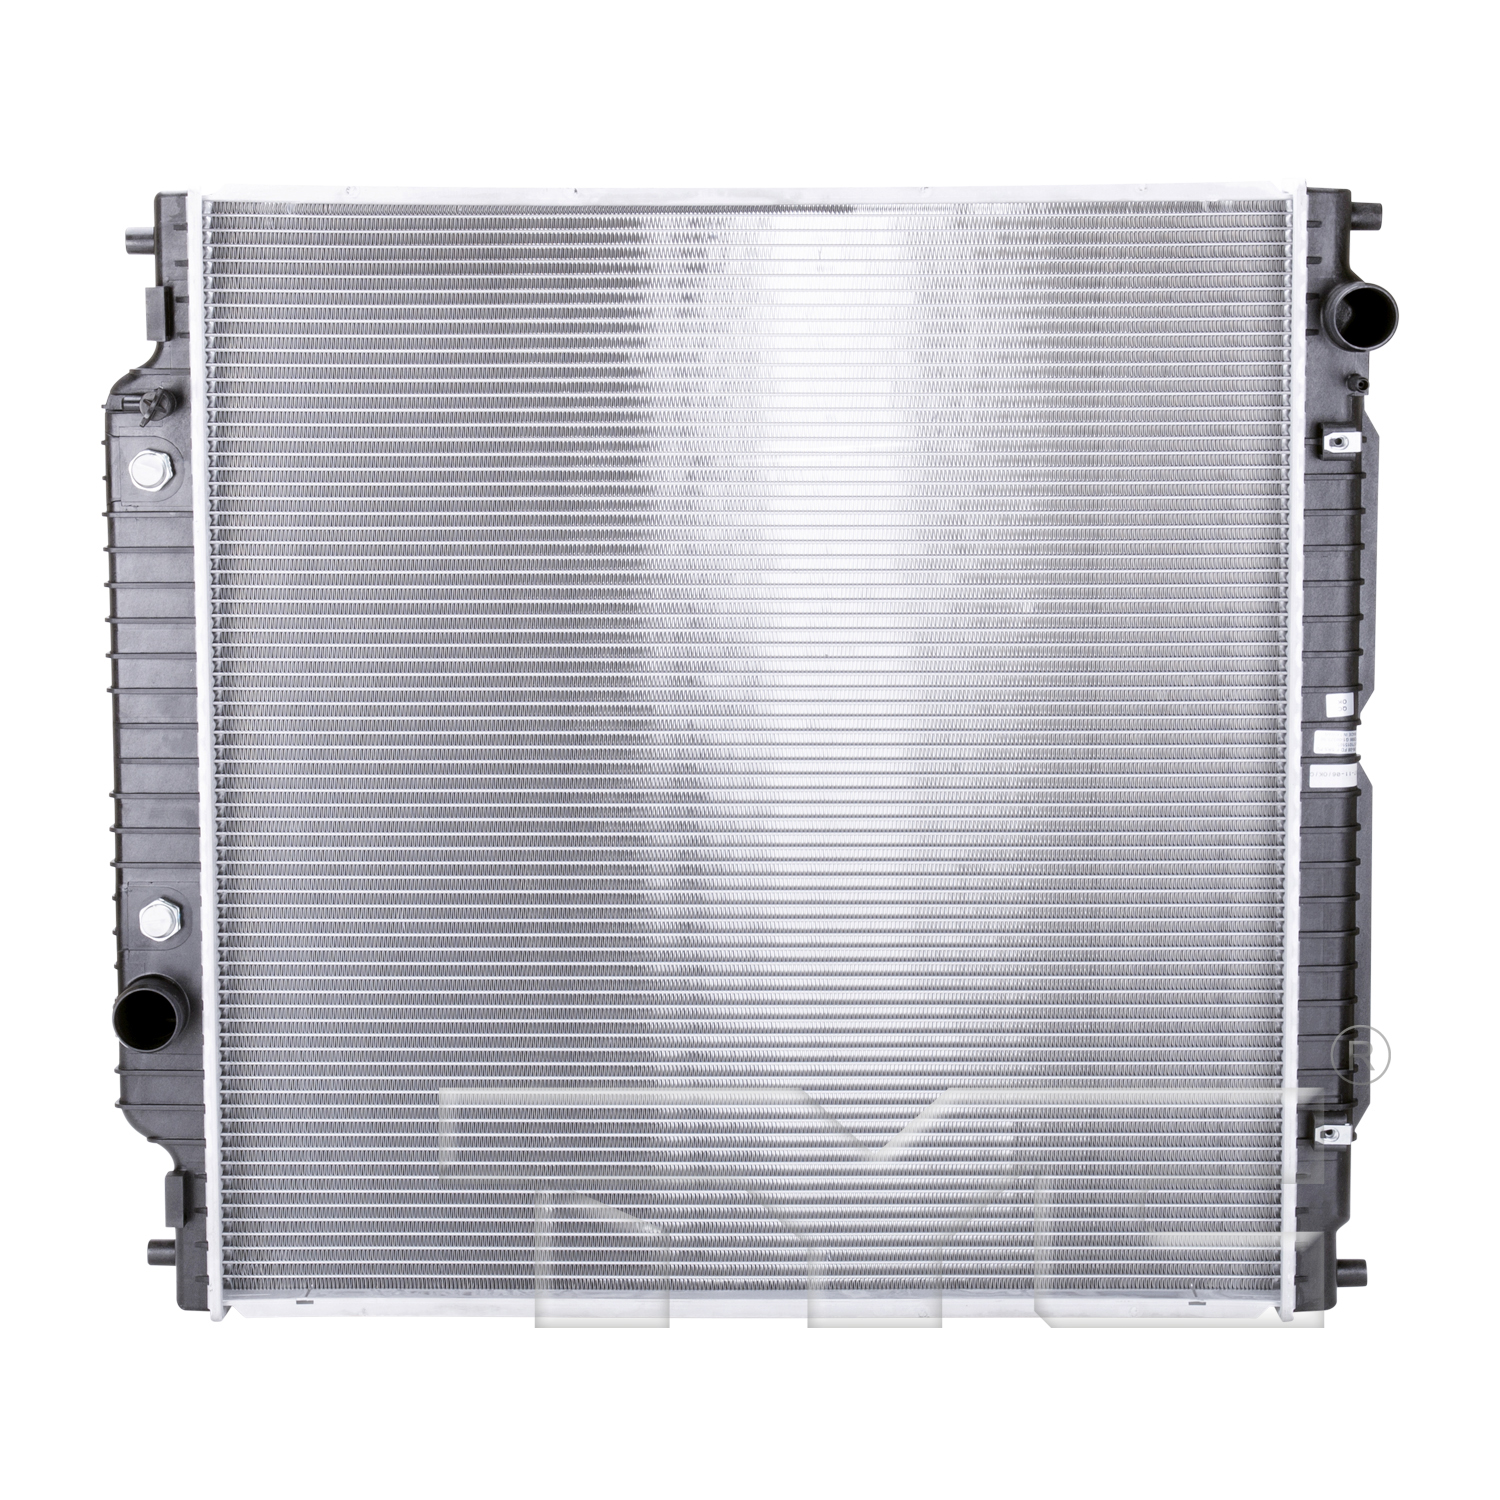 Aftermarket RADIATORS for FORD - F-250 SUPER DUTY, F-250 SUPER DUTY,06-07,Radiator assembly